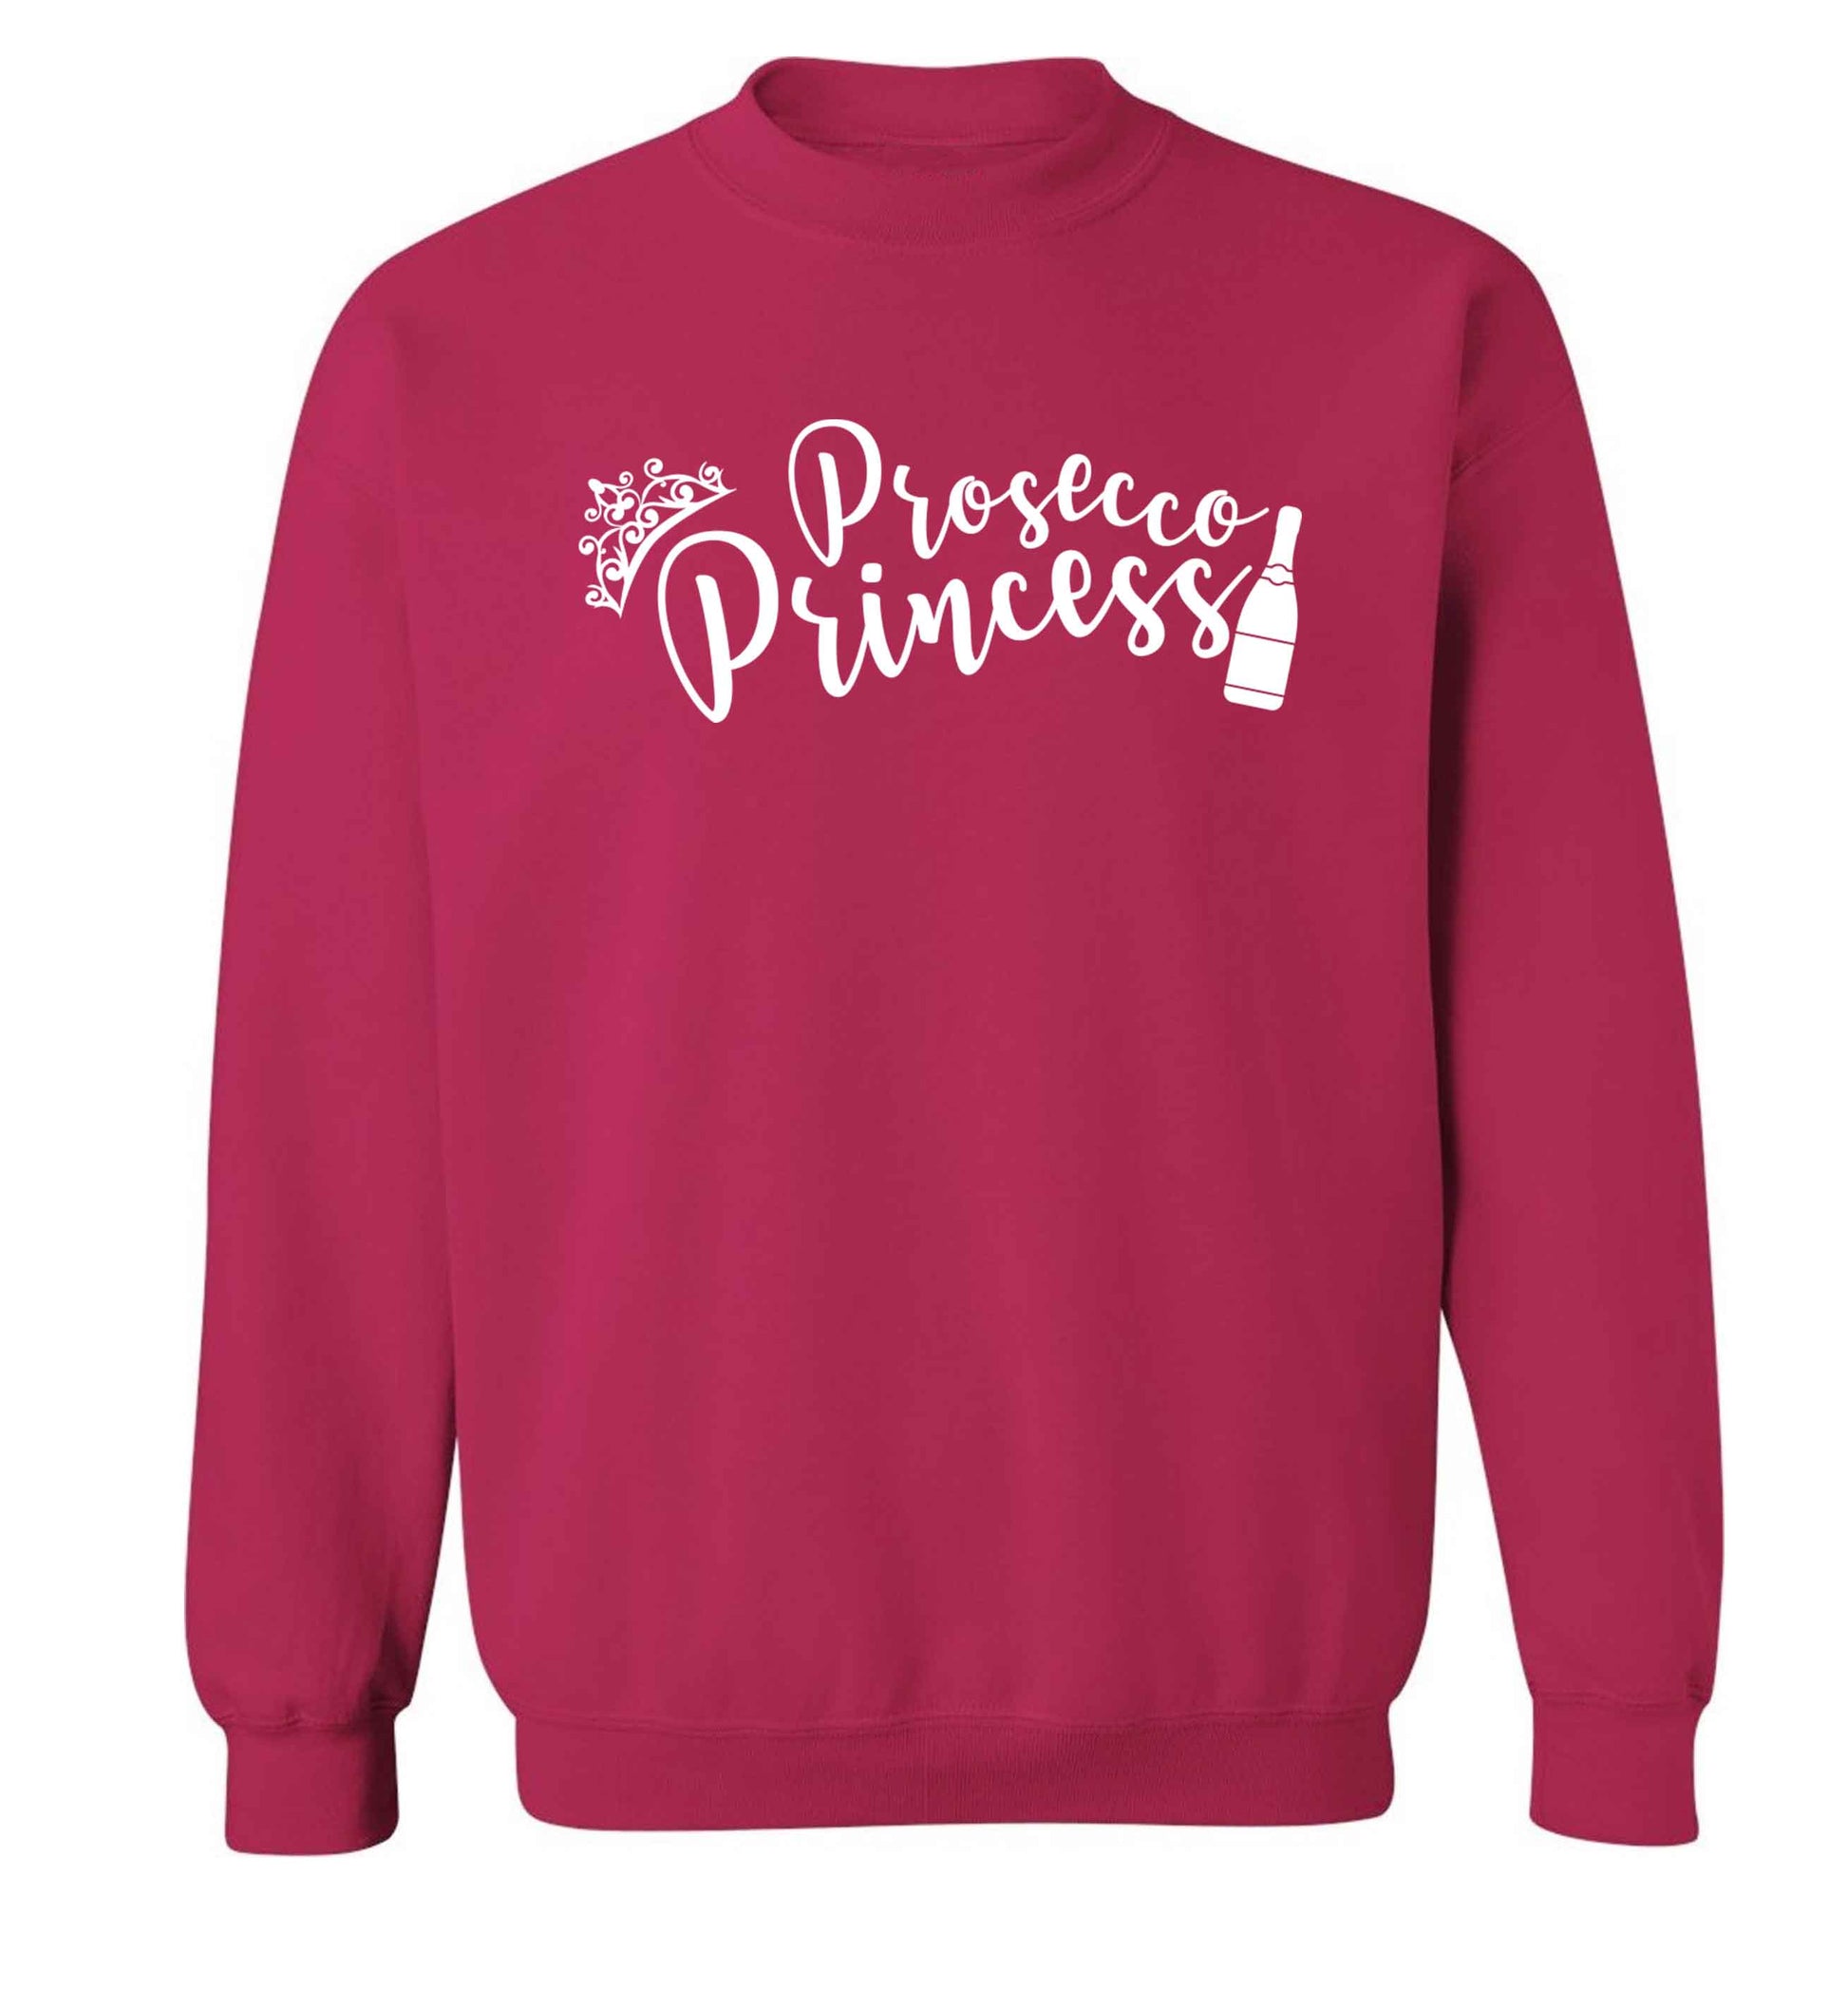 Prosecco princess Adult's unisex pink Sweater 2XL